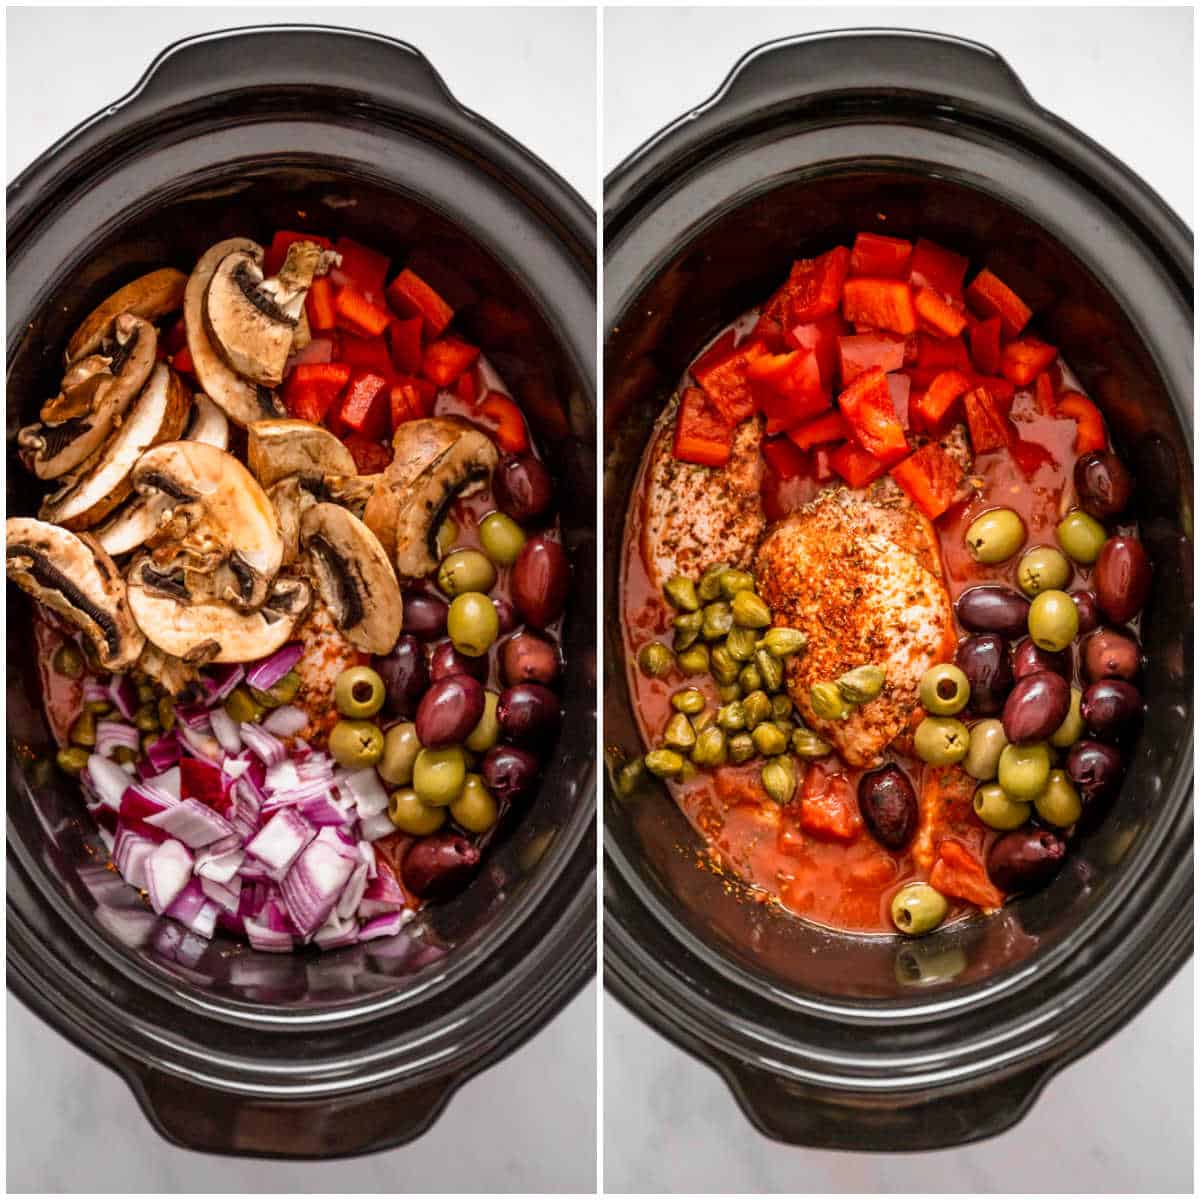 Steps to make slow cooker chicken cacciatore.